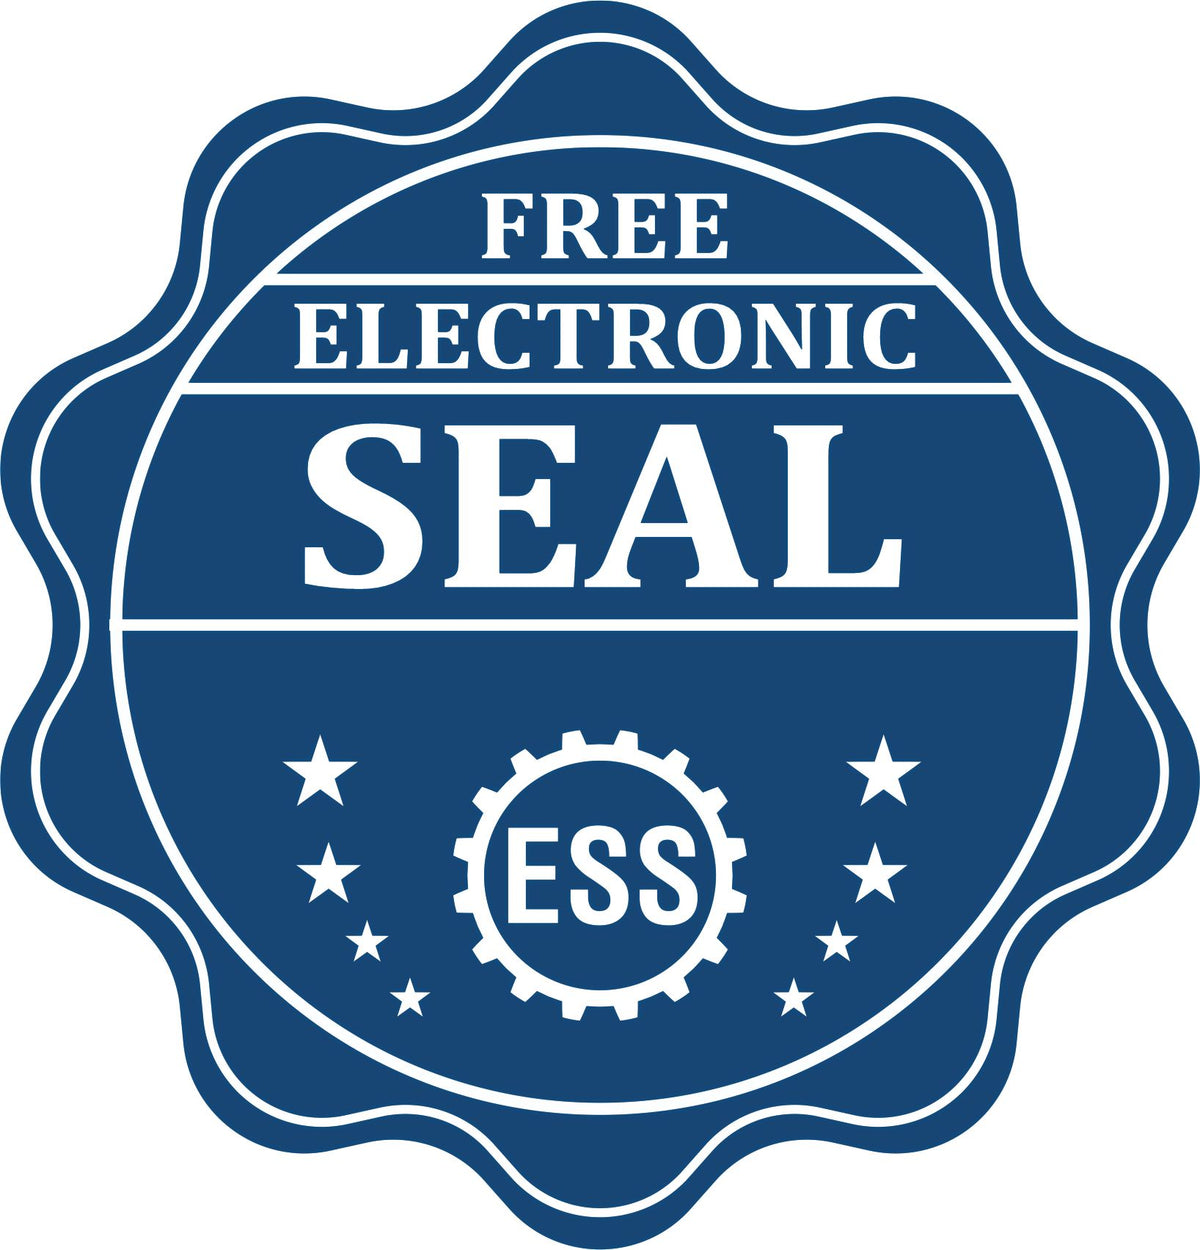 A badge showing a free electronic seal for the Soft Colorado Professional Geologist Seal with stars and the ESS gear on the emblem.